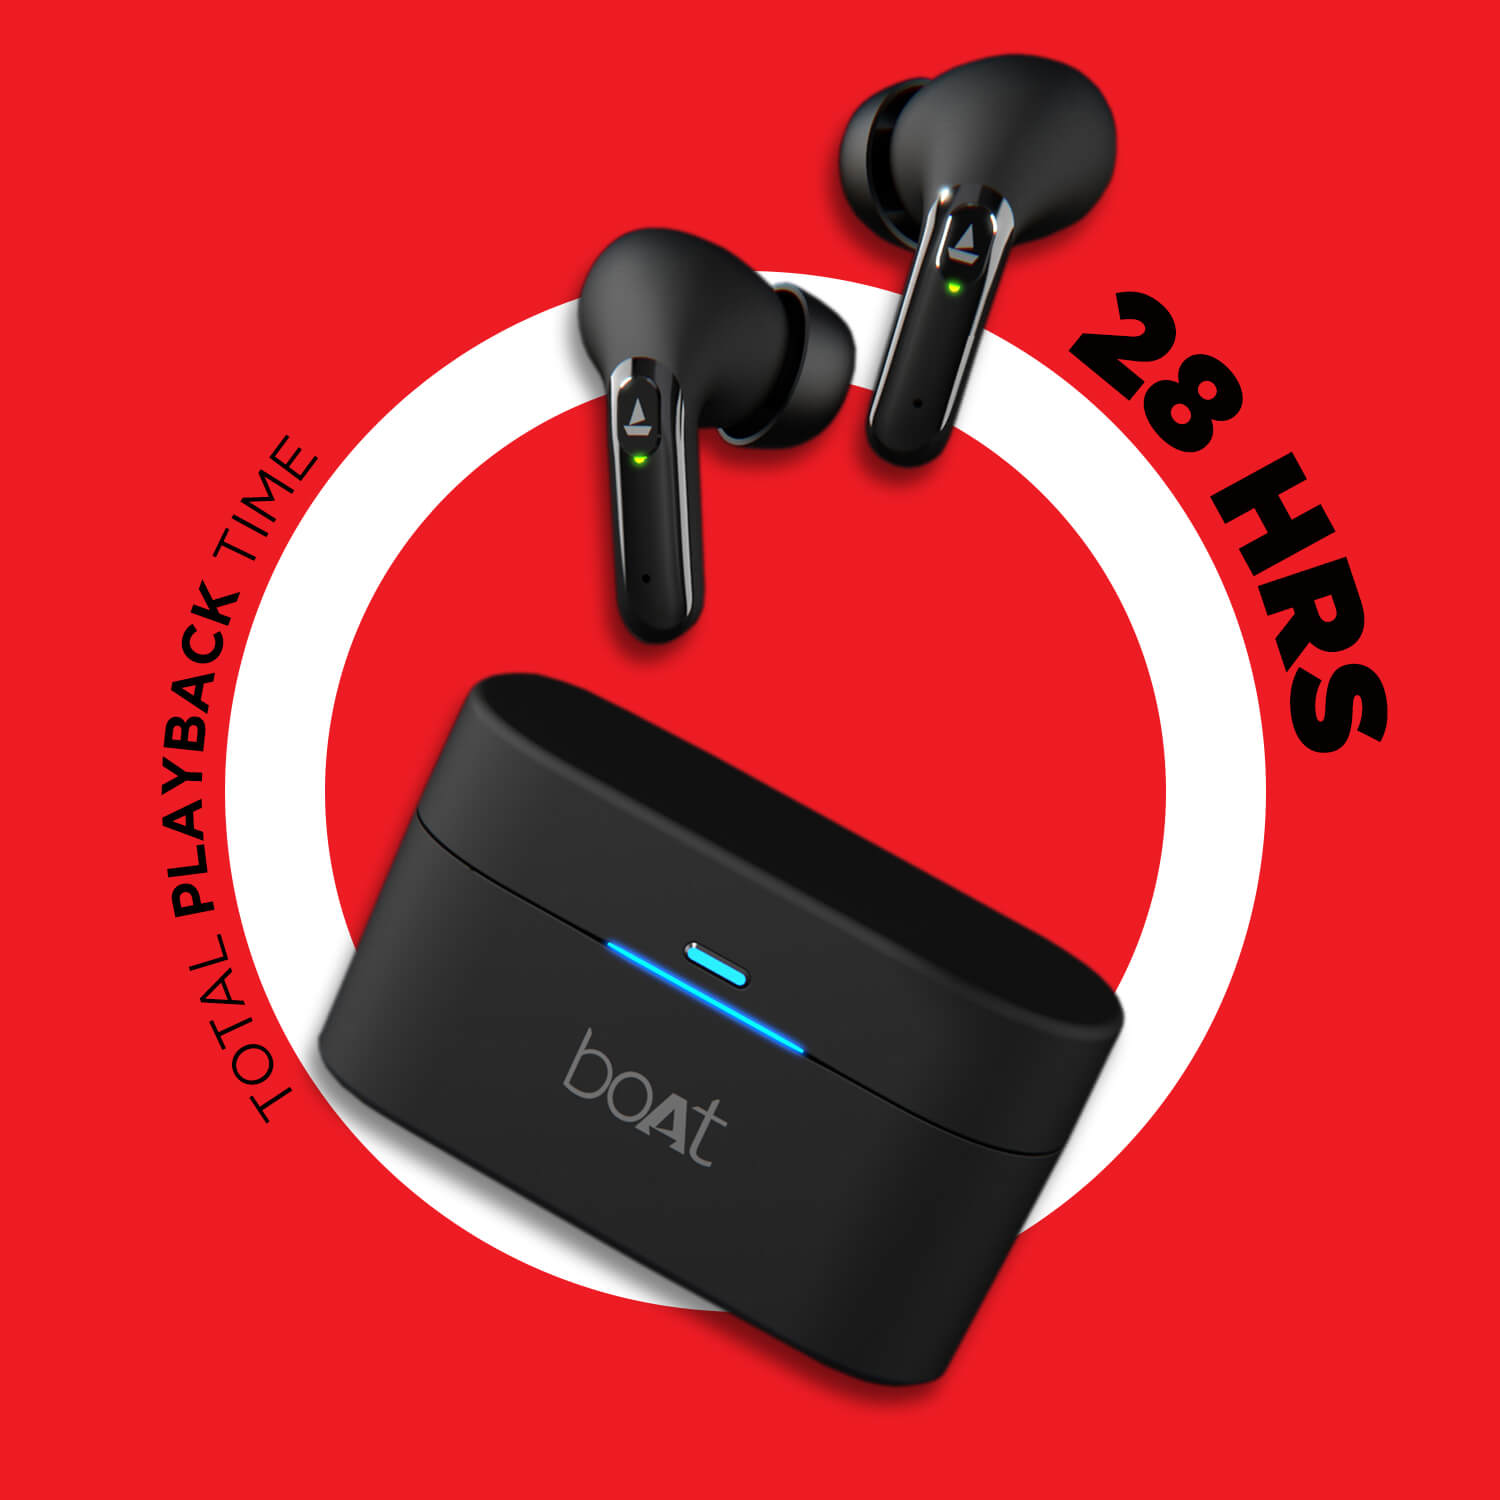 boAt Airdopes 701 ANC | Wireless Earbuds with 9mm drivers, BEAST™ Mode for Gamers, Noise Cancellation & 550 mAh Charging Case